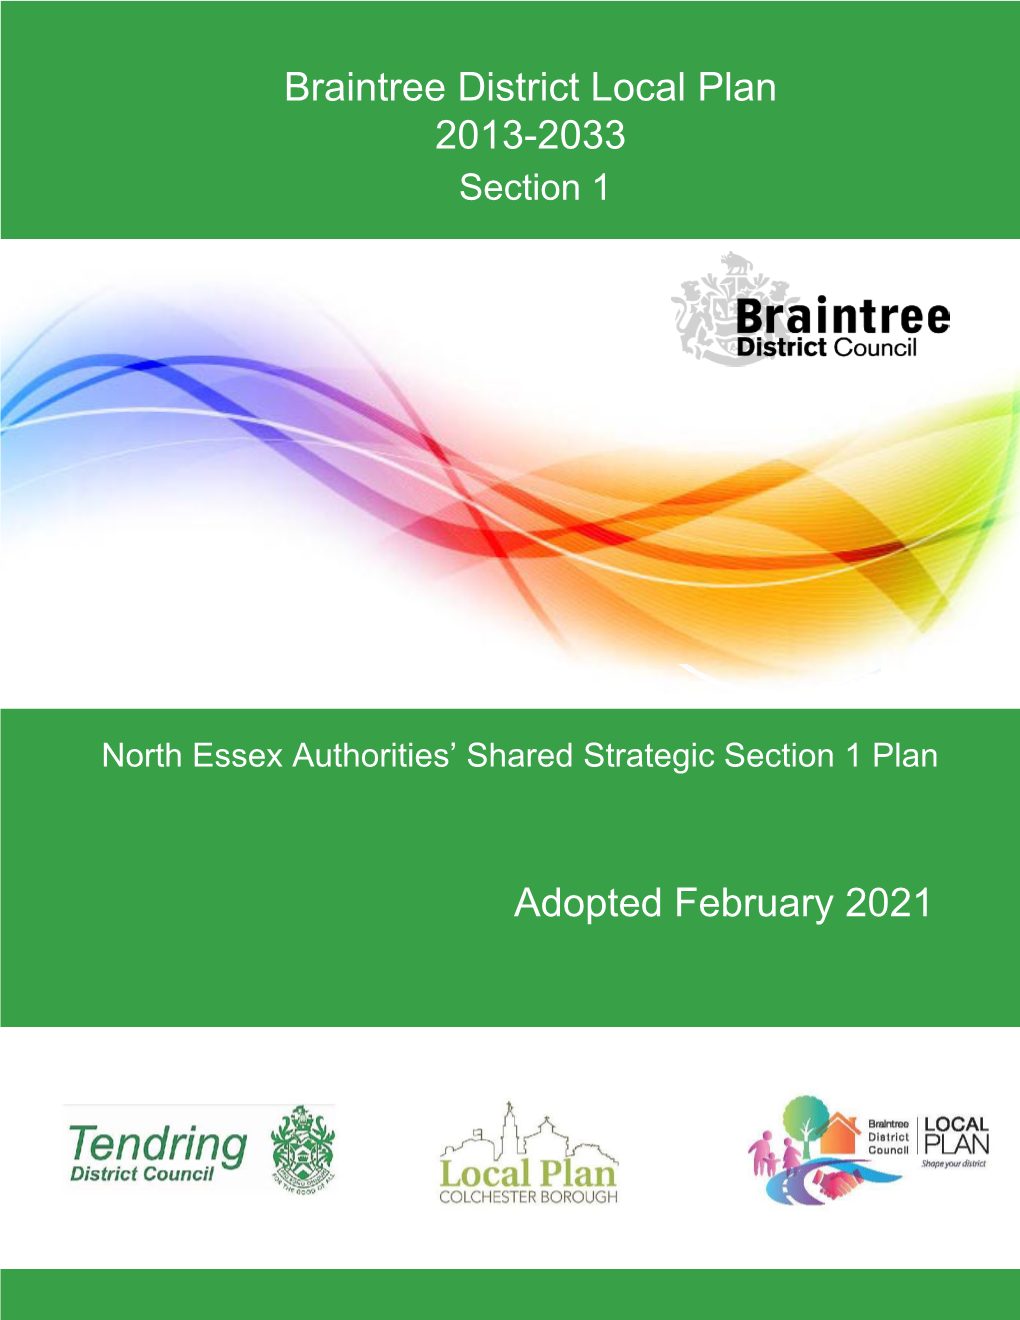 North Essex Authorities' Shared Strategic Section 1 Plan